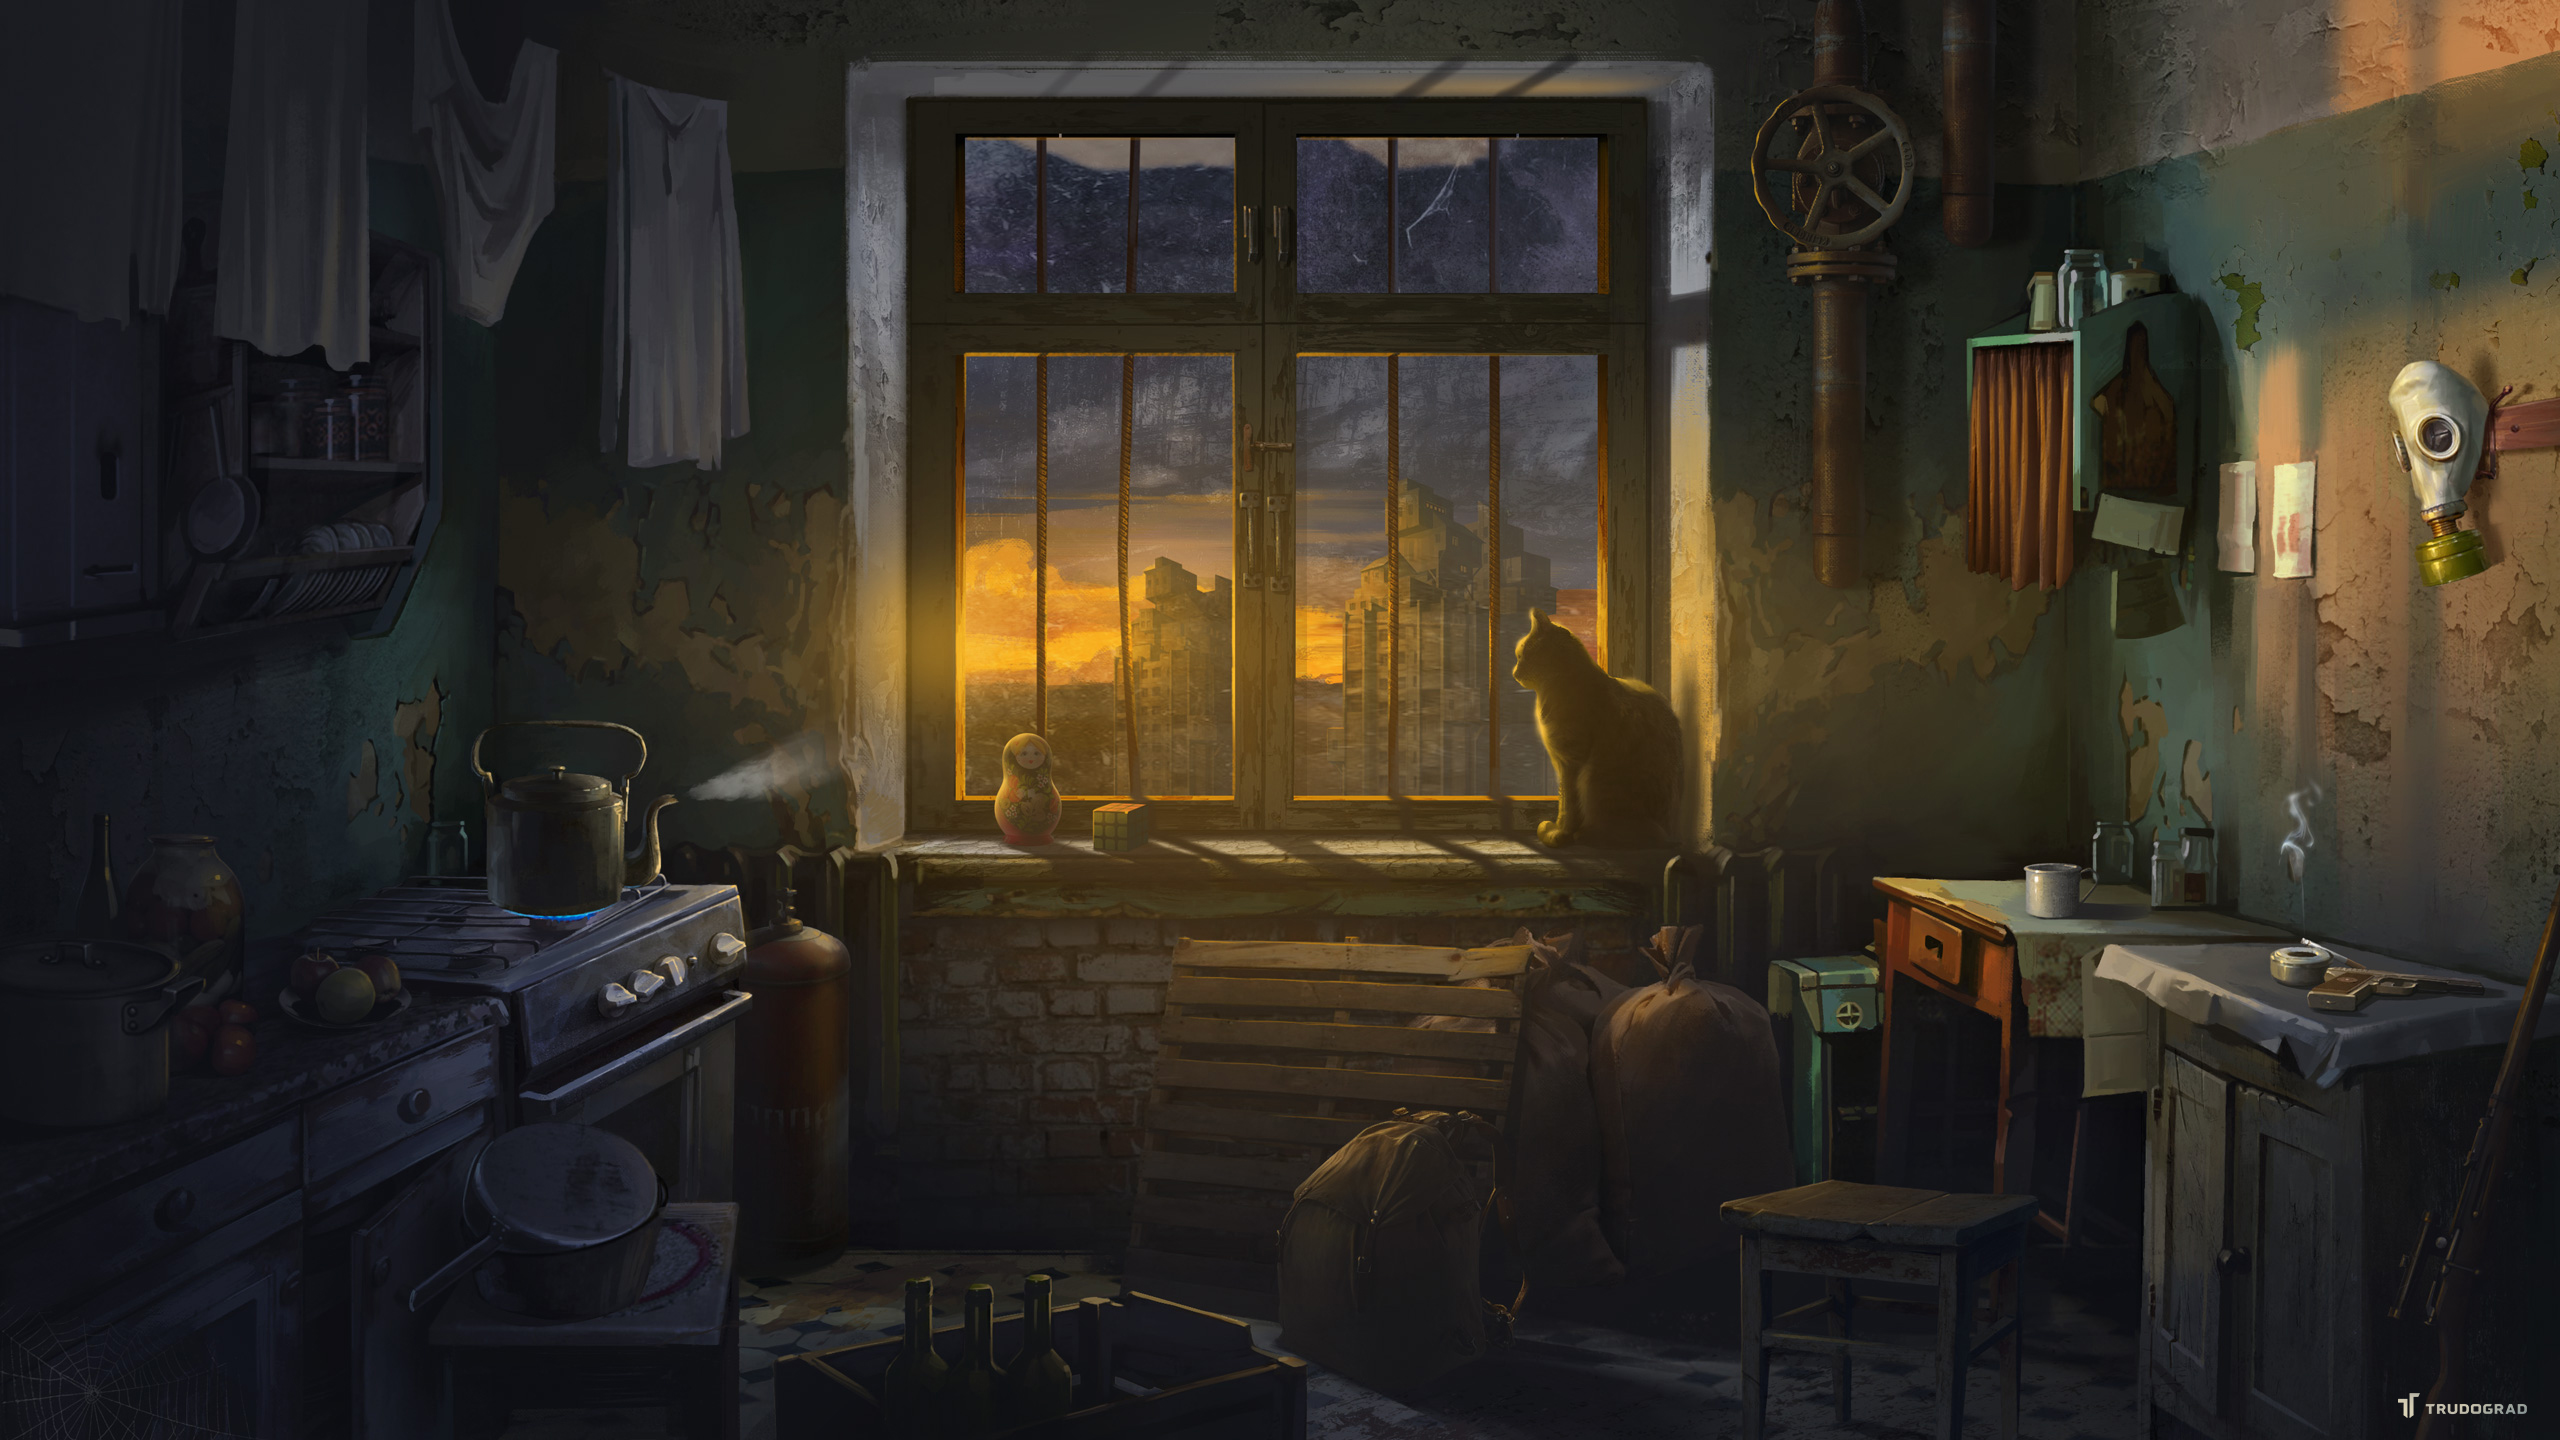 ATOM RPG RPG Doomsday Wasteland Game Trudograd Sunset Glow Cats Video Games Window Video Game Art 2560x1440